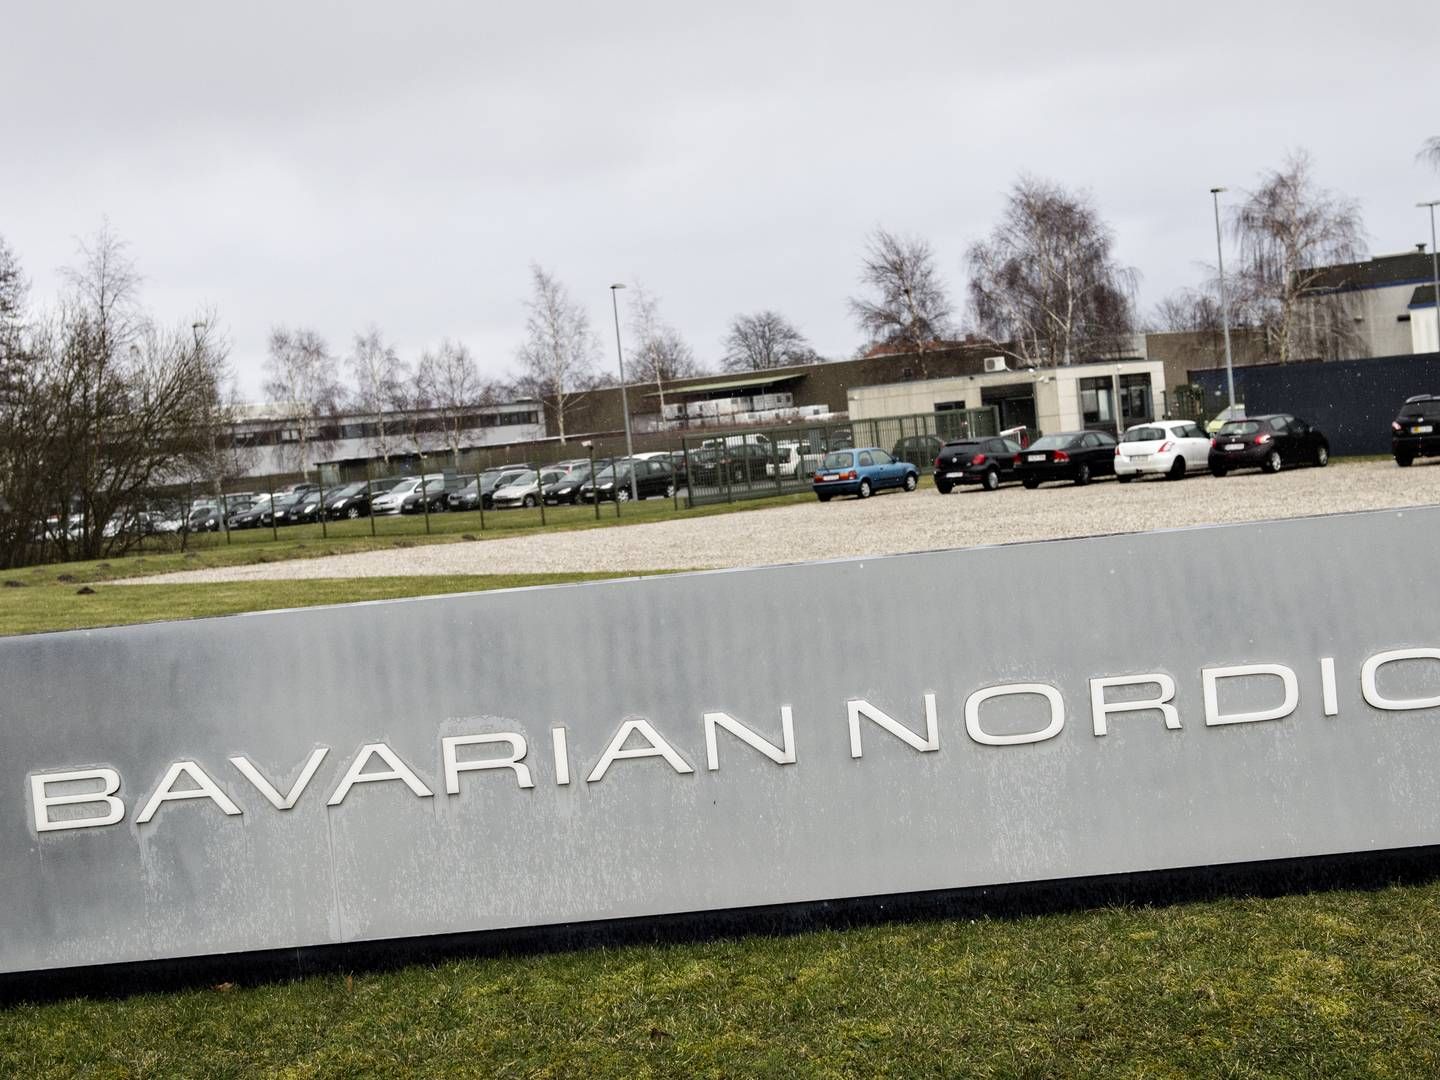 Though overlooked, Bavarian Nordic's travel vaccines have performed better than expected in the recently concluding quarter | Photo: Philip Davali/Ekstra Bladet, Philip Davali